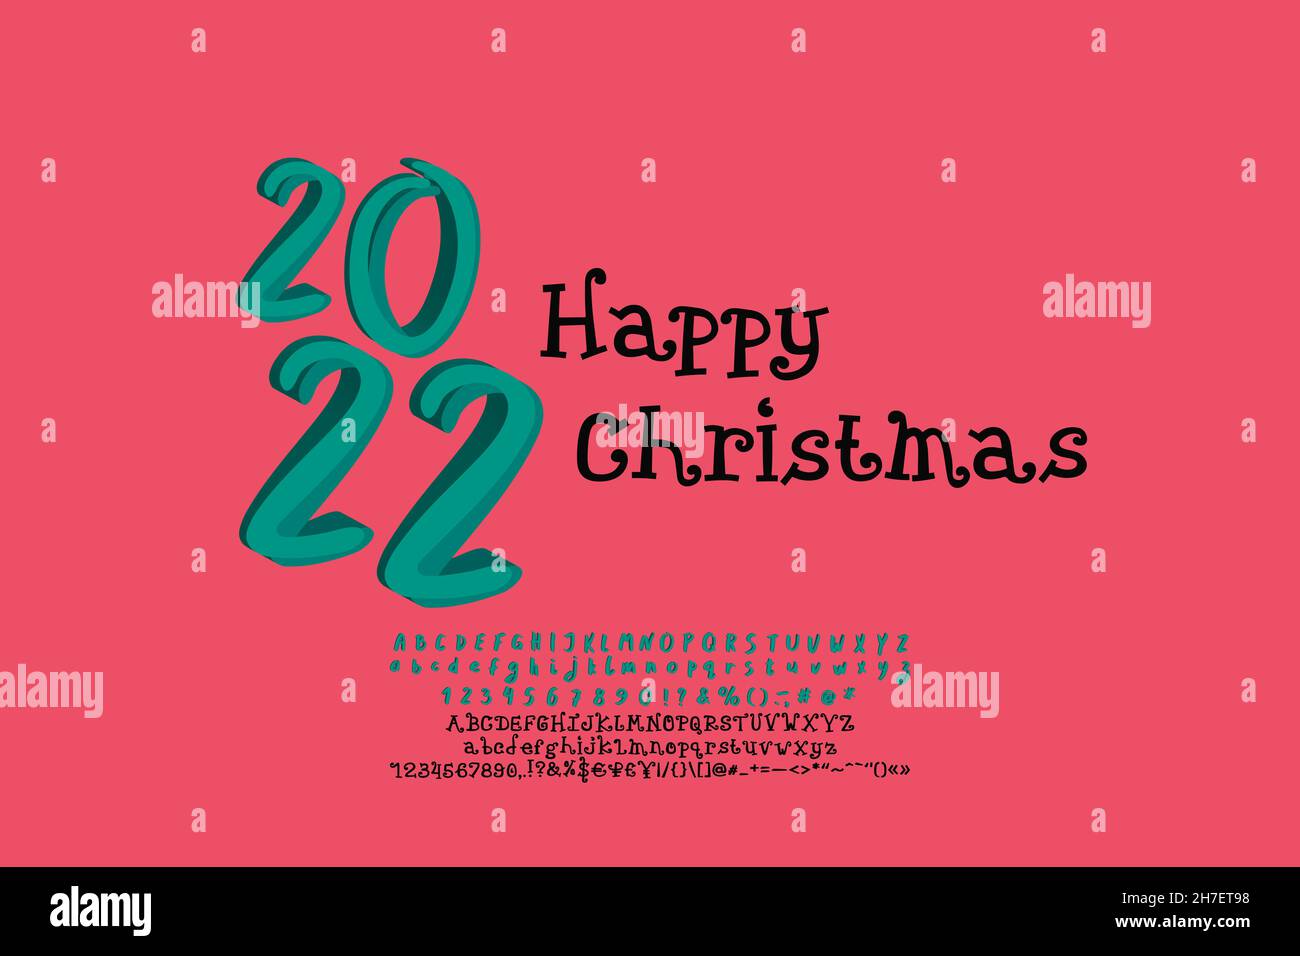 Bright poster retro style Happy Christmas. Green numbers and curly letters black color on red background. Originals hand drawn fonts. Stock Vector